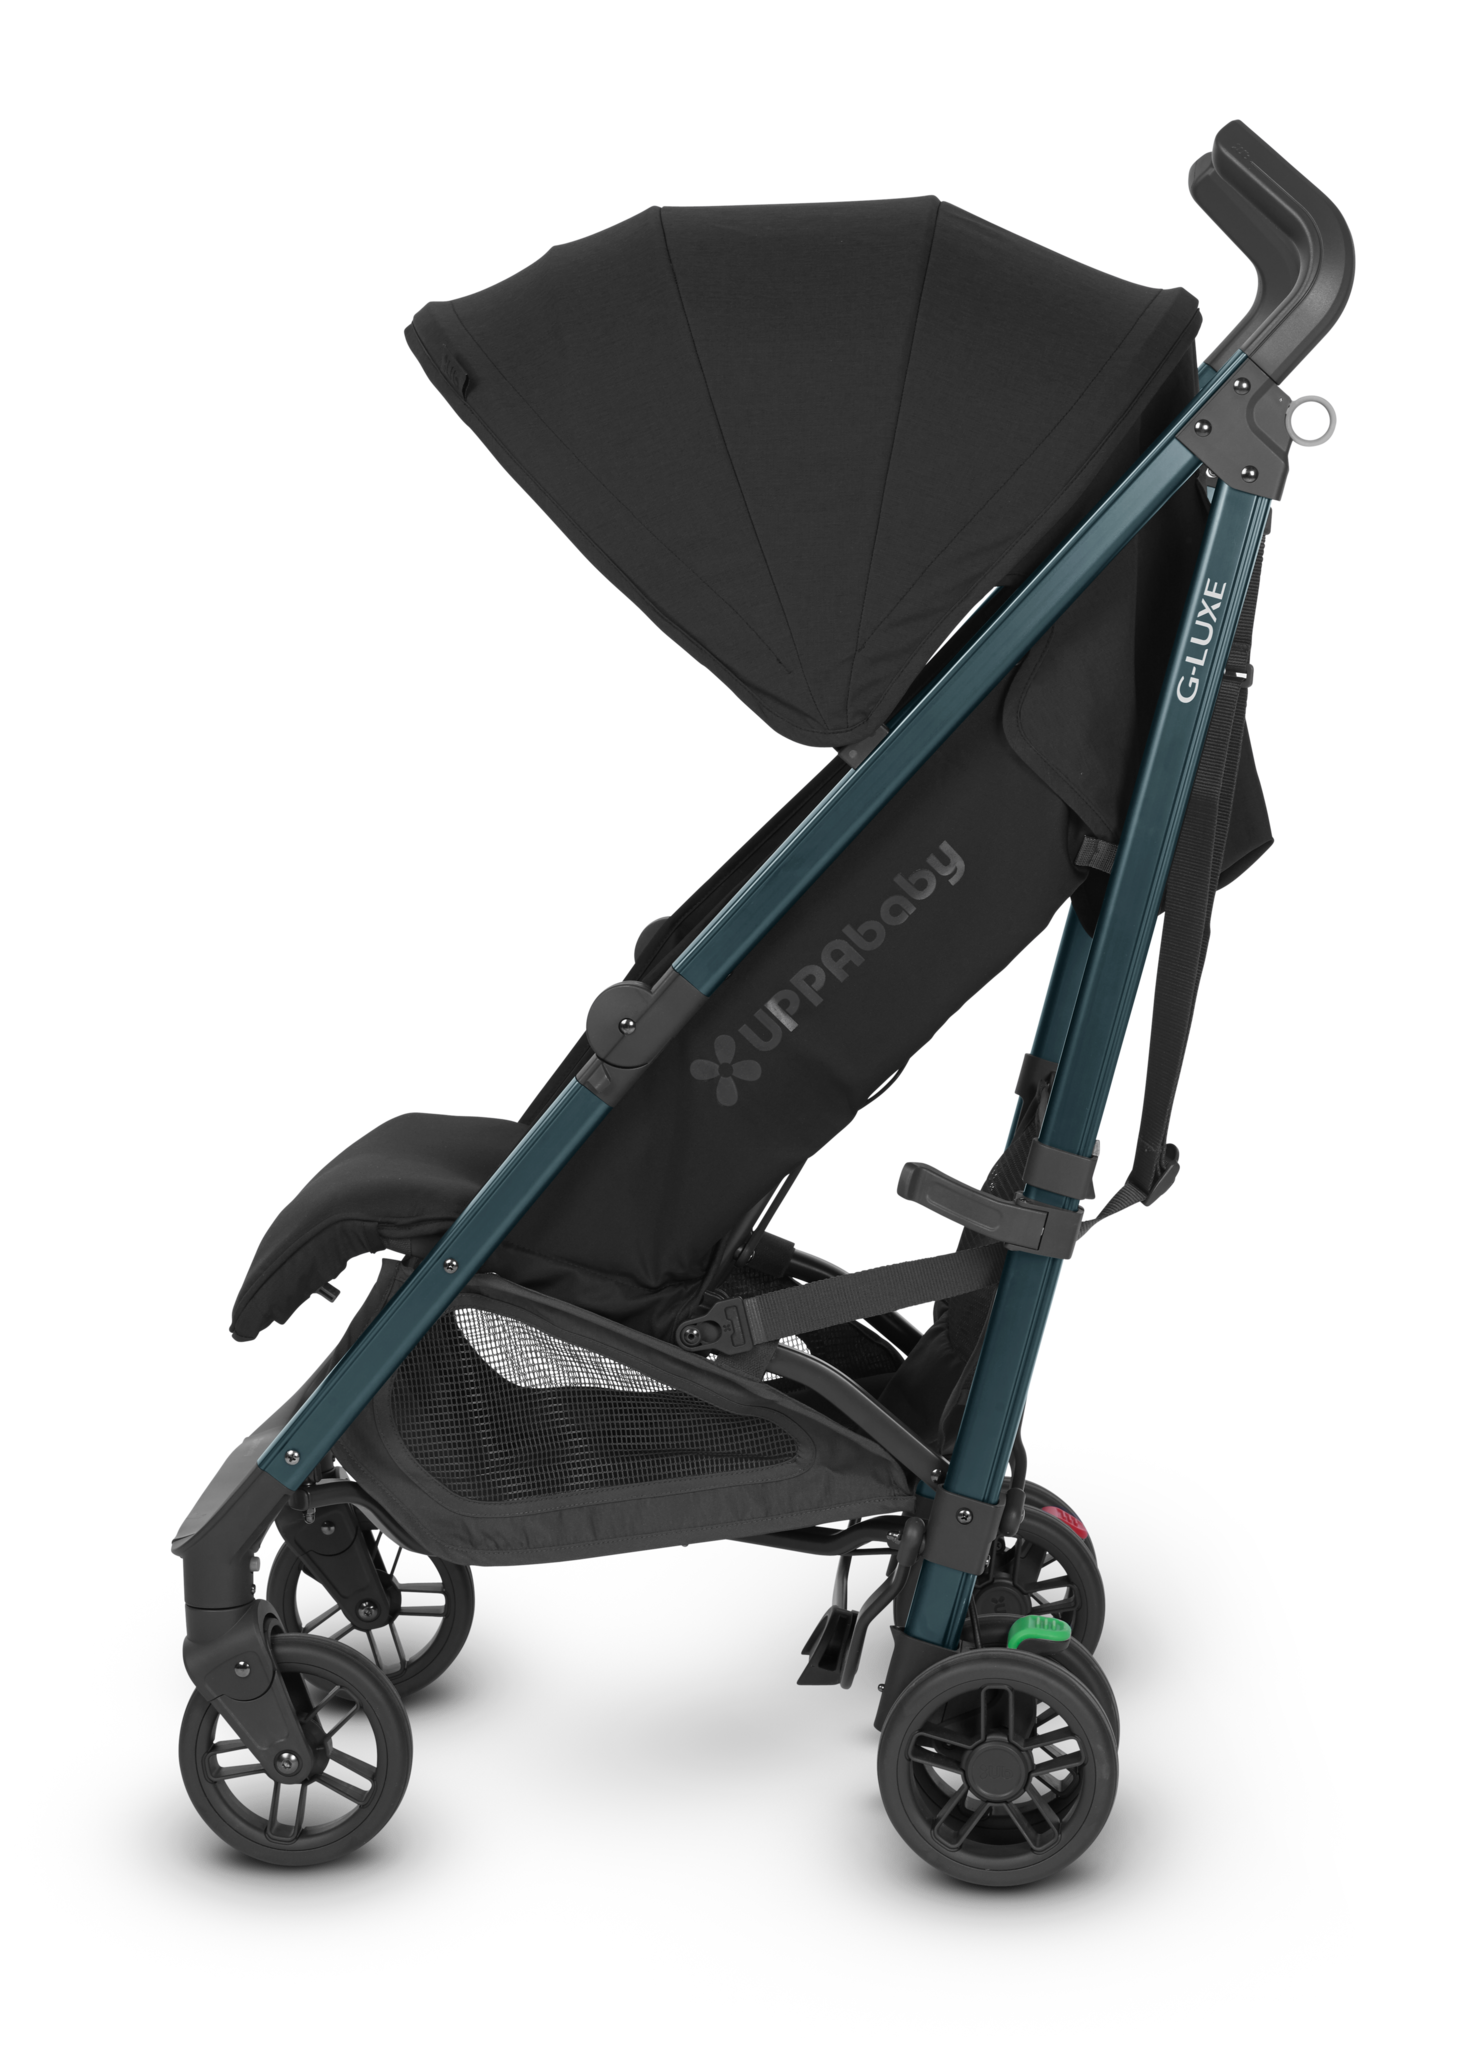 UPPAbaby UPPAbaby G-LUXE - Jake (Black)